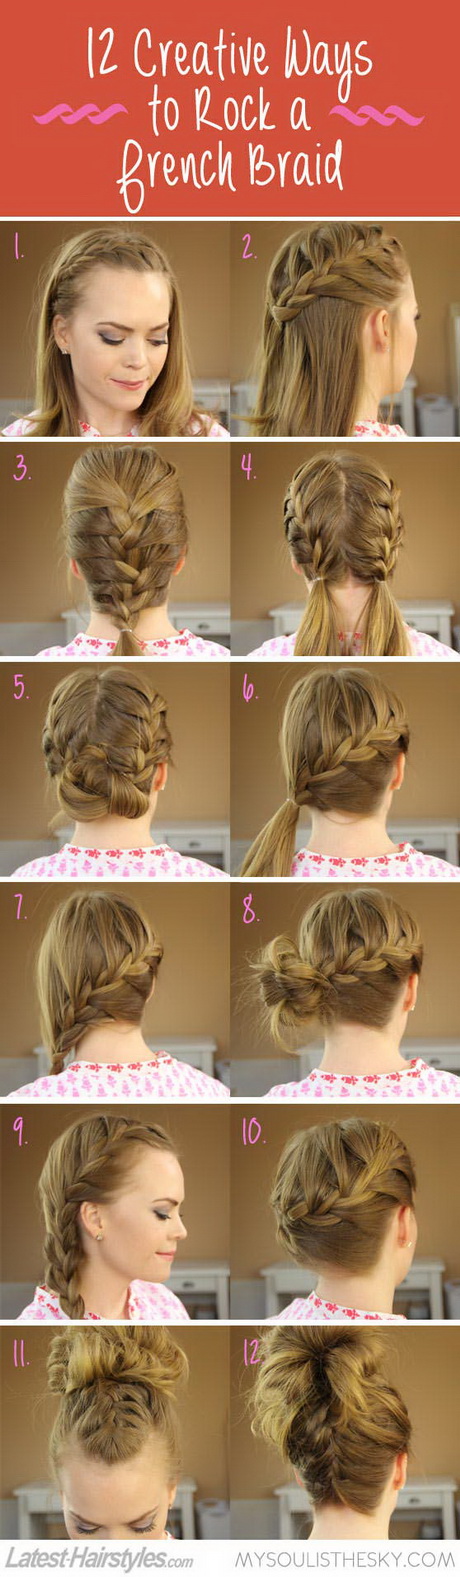 easy-french-braid-hairstyles-06_15 Easy french braid hairstyles